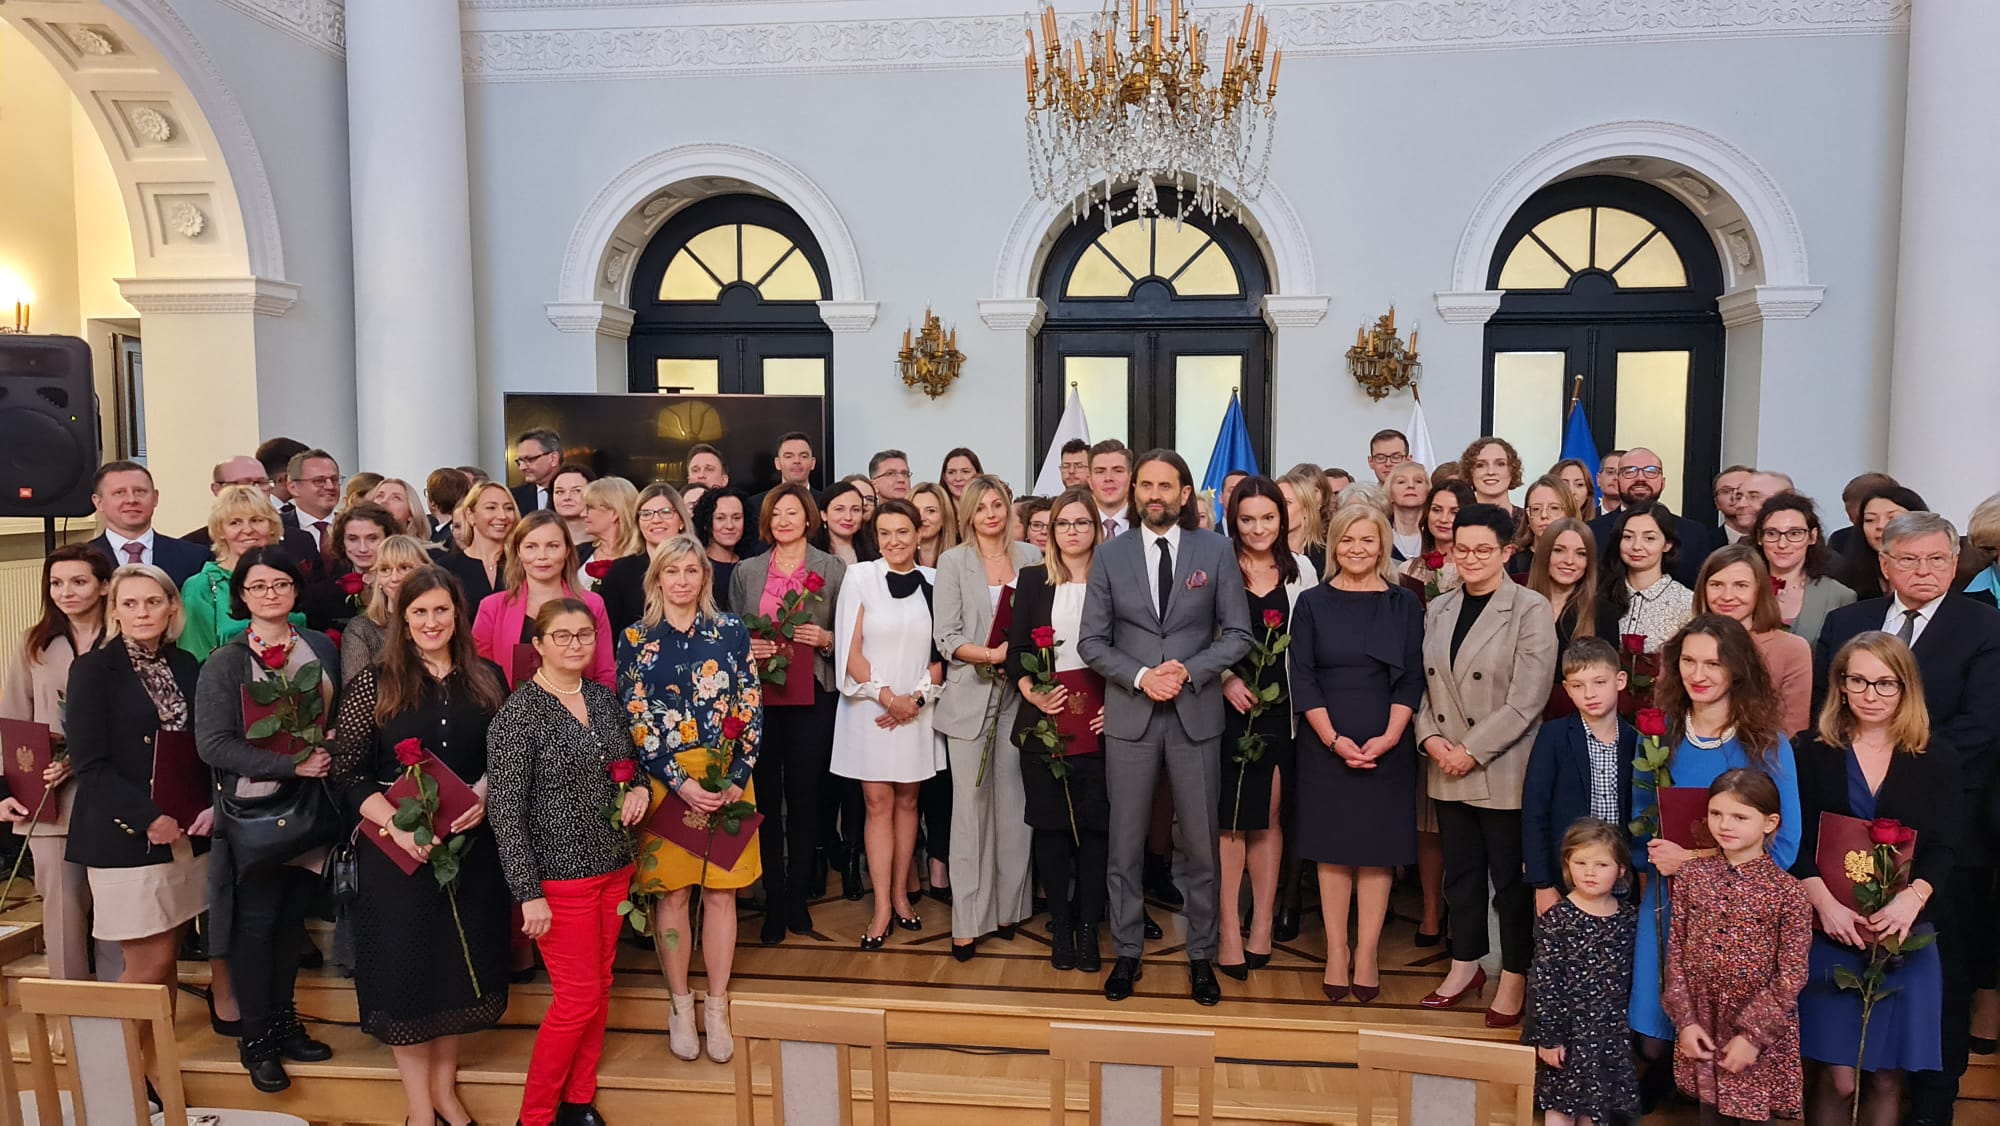 Specialists of the year 2021. Among them - employees of the WUM